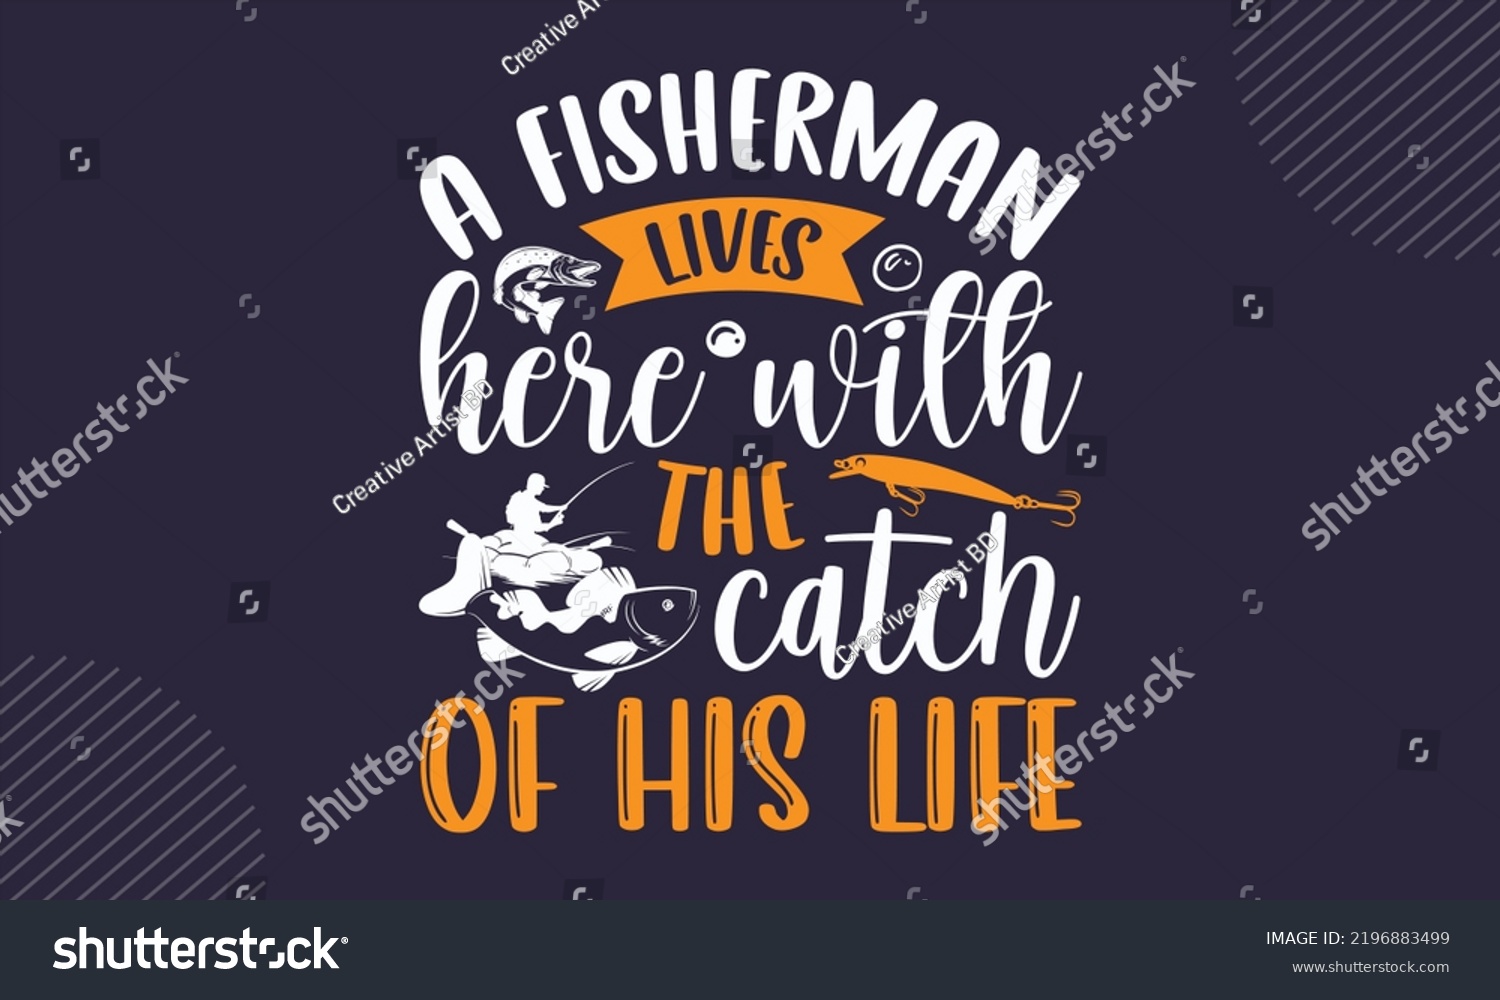 SVG of A Fisherman Lives Here With The Catch Of His Life - Fishing T shirt Design, Hand drawn vintage illustration with hand-lettering and decoration elements, Cut Files for Cricut Svg, Digital Download svg